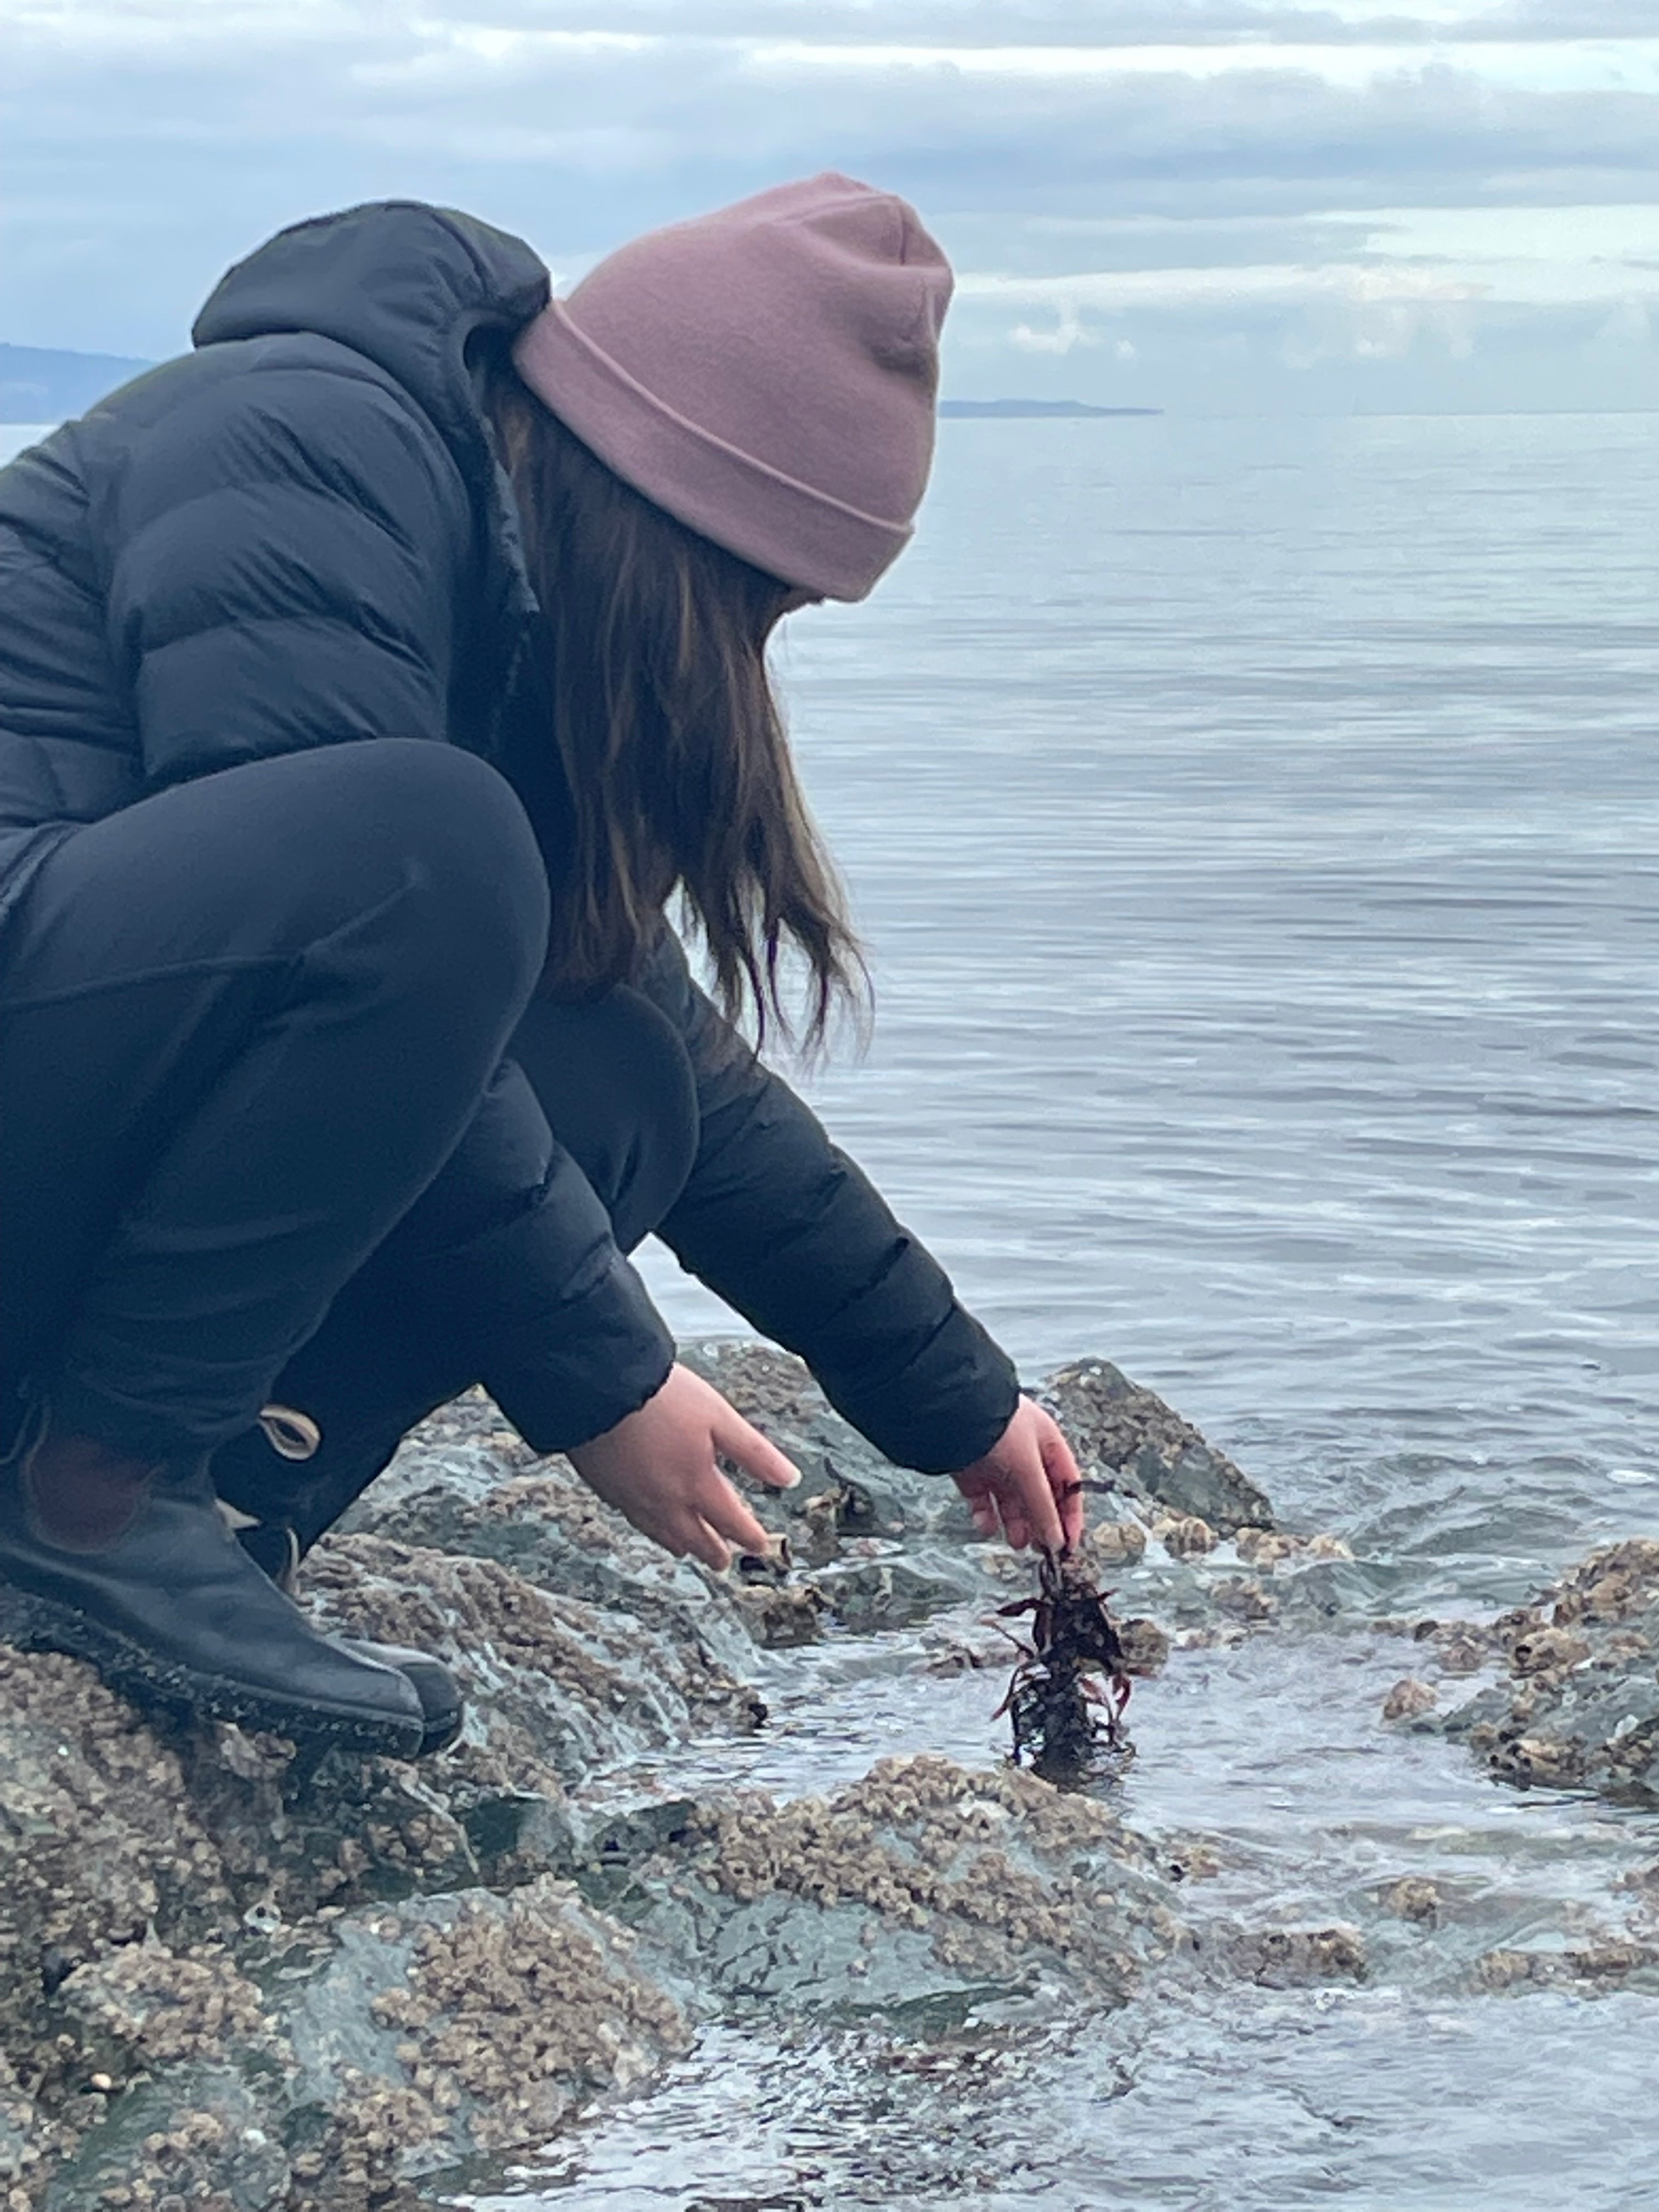 Kelly Zheng examines seaweed on Canada’s west coast during her research.